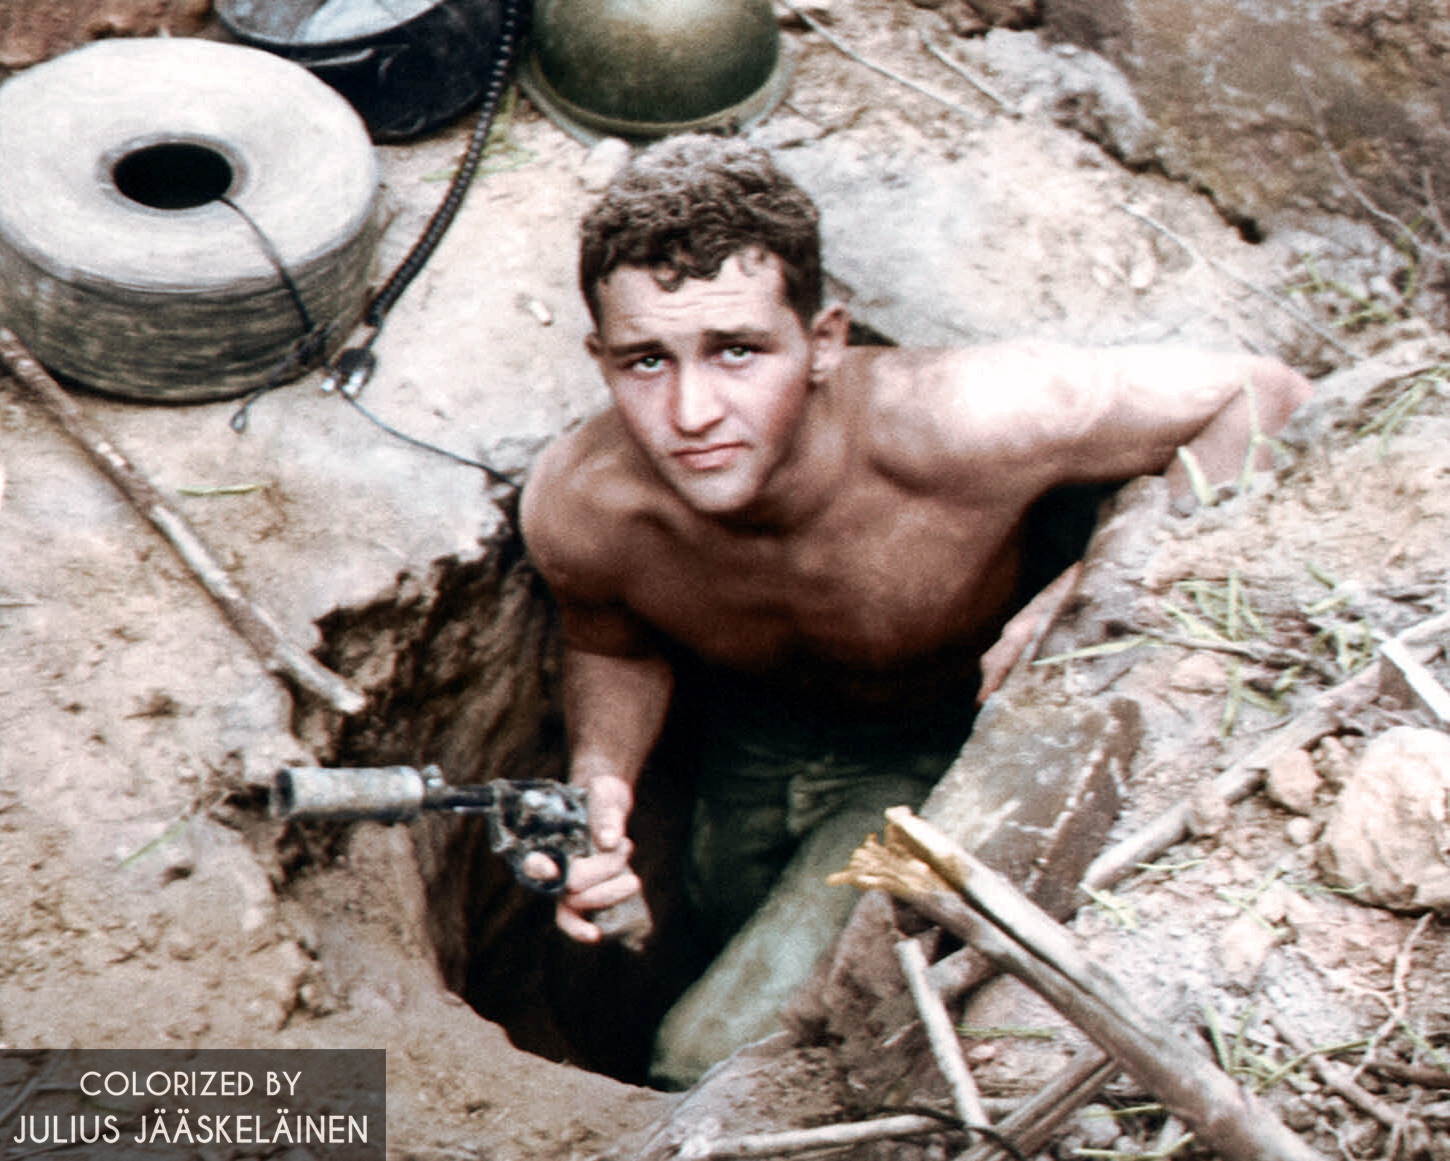 An American "tunnel rat" about to enter a Viet cong tunnel with a suppressed revolver, Vietnam 1960's